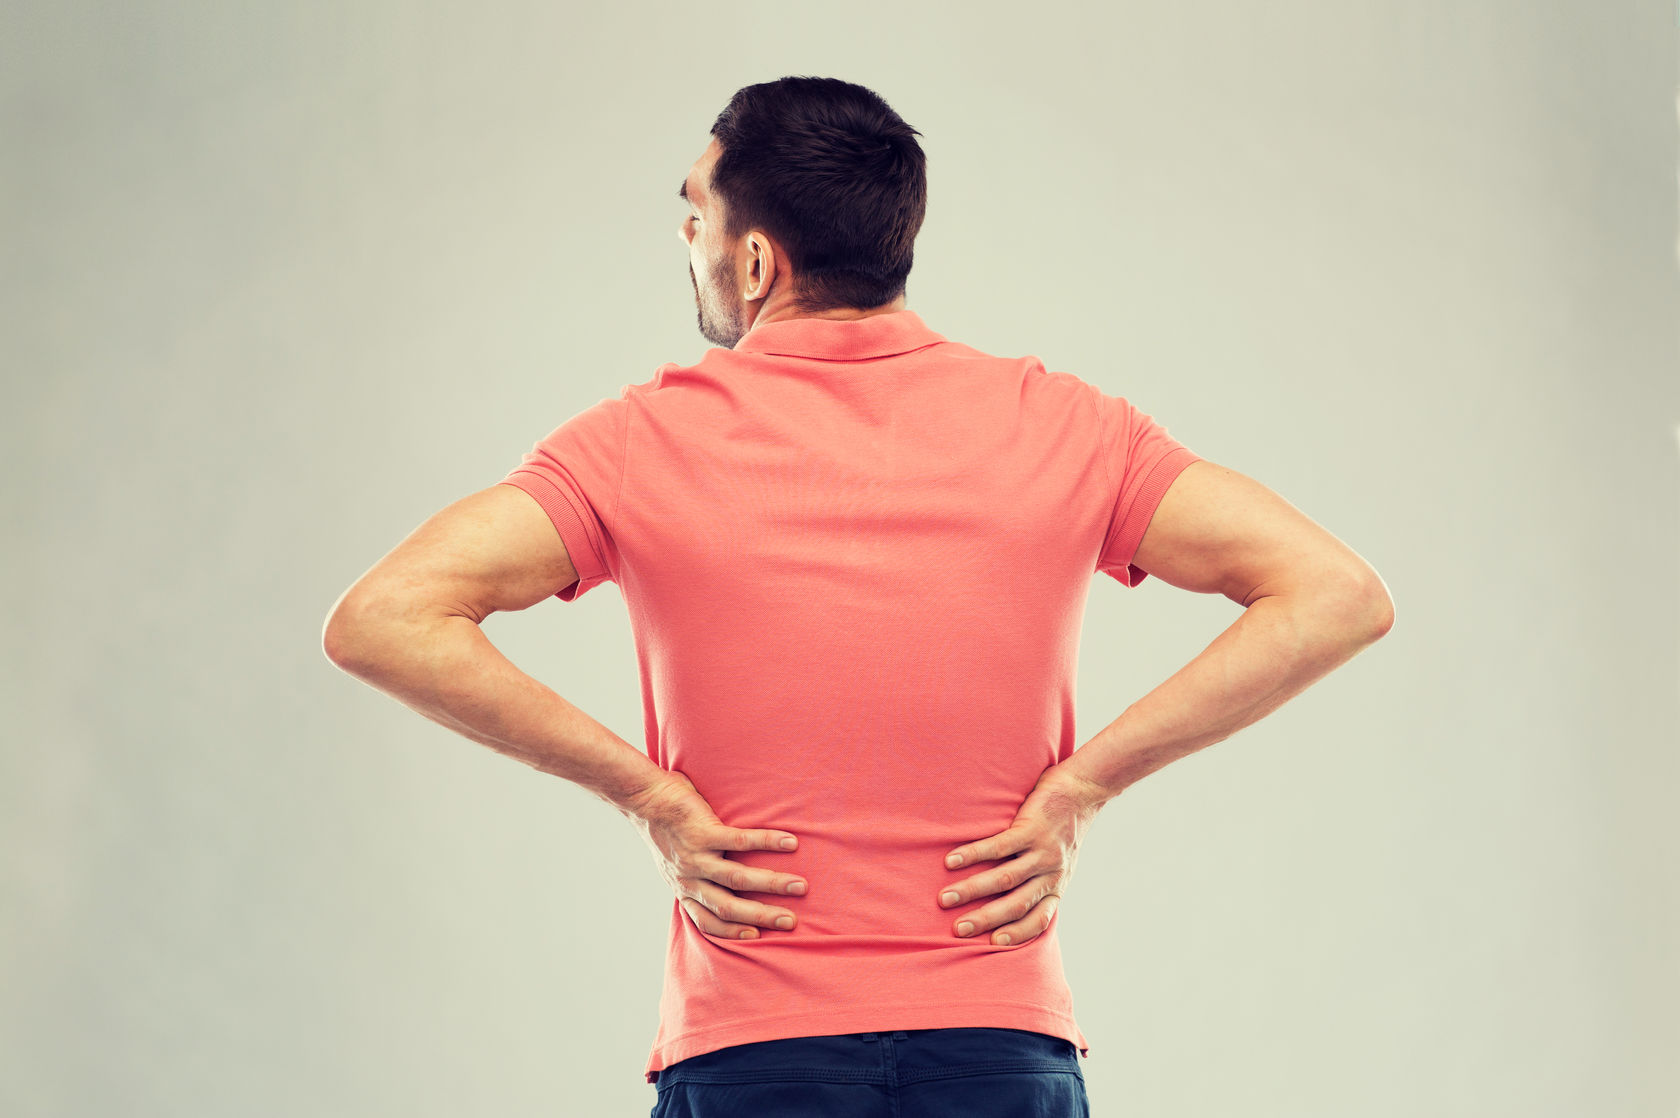 5 Bad Habits That Lead To Lower Back Pain